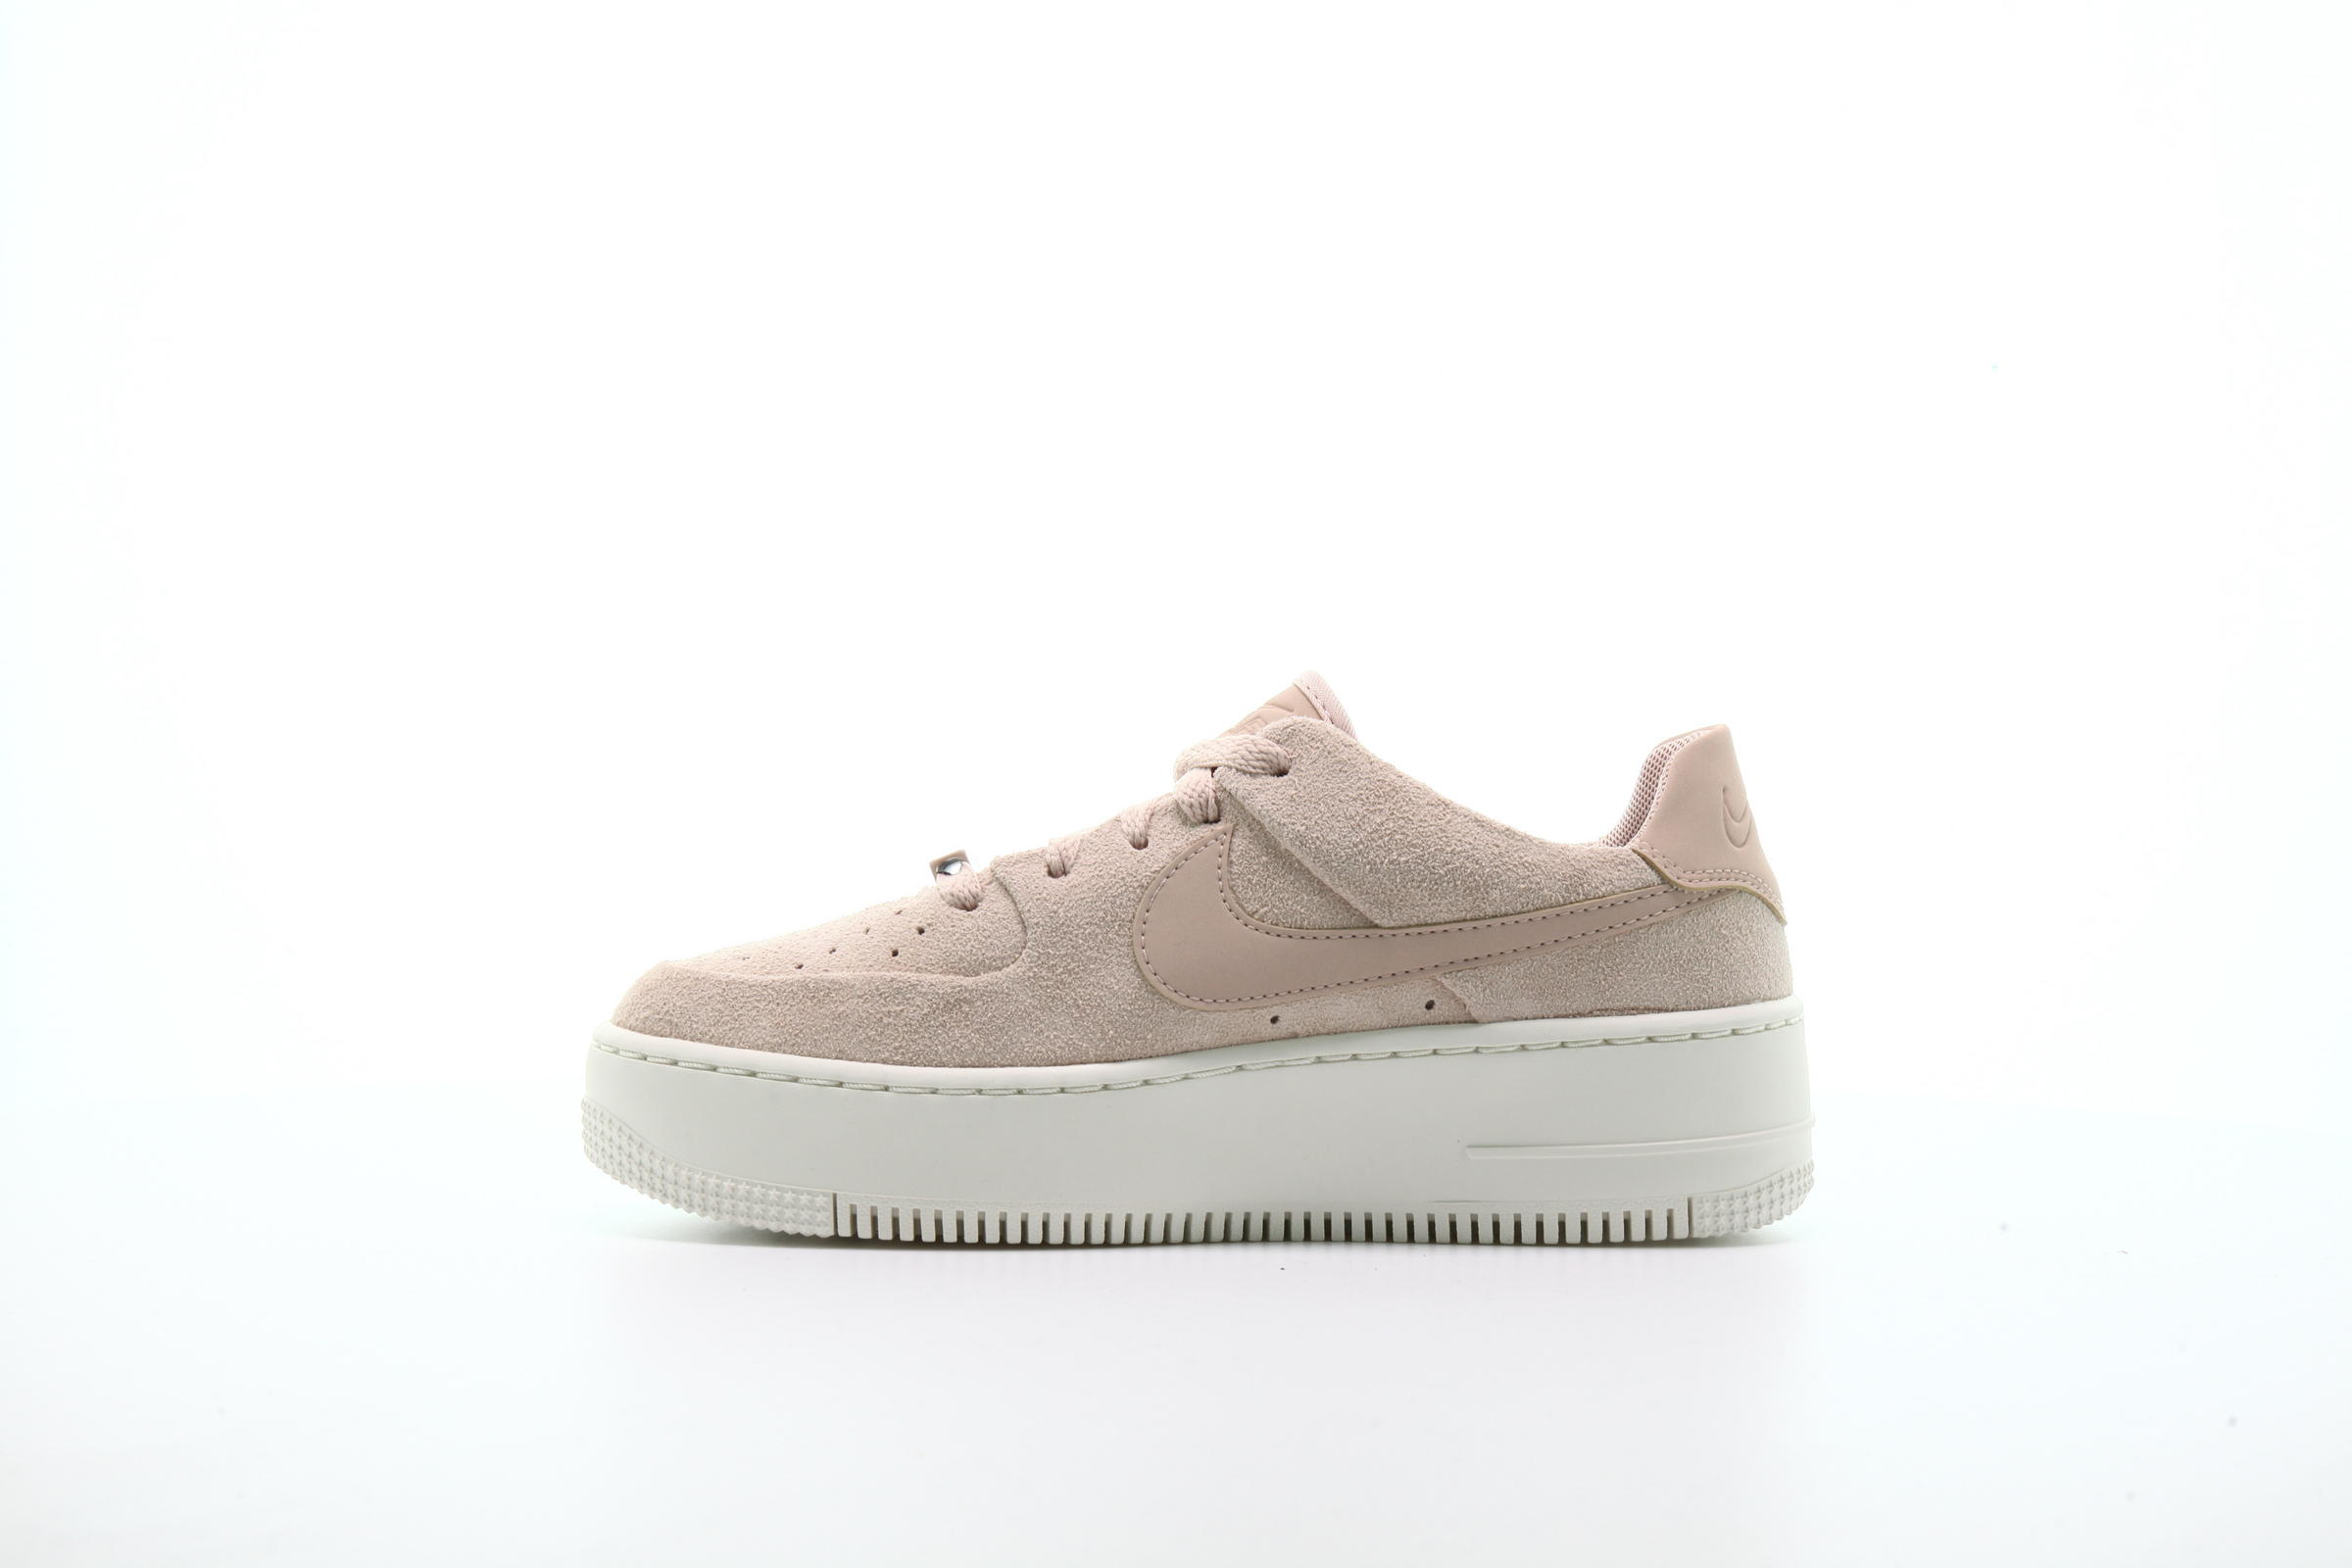 Nike WMNS Air Force 1 Sage Low "Particle Beige"